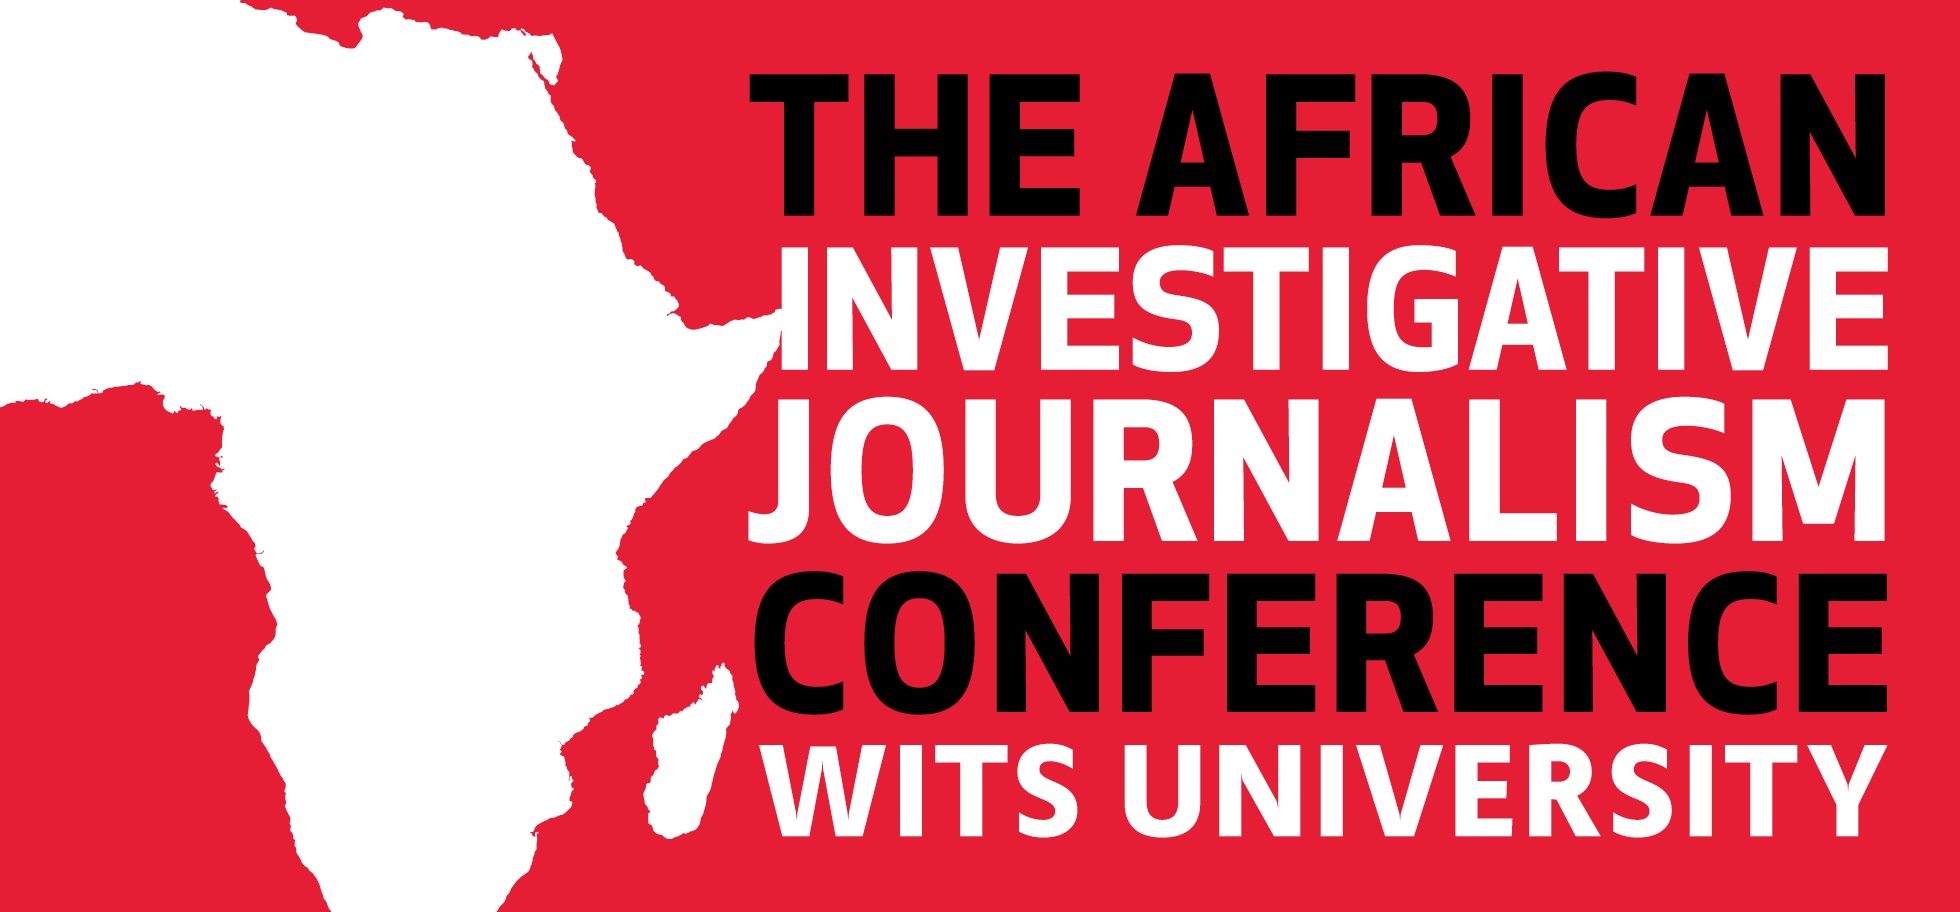 The African Investigative Journalism Conference